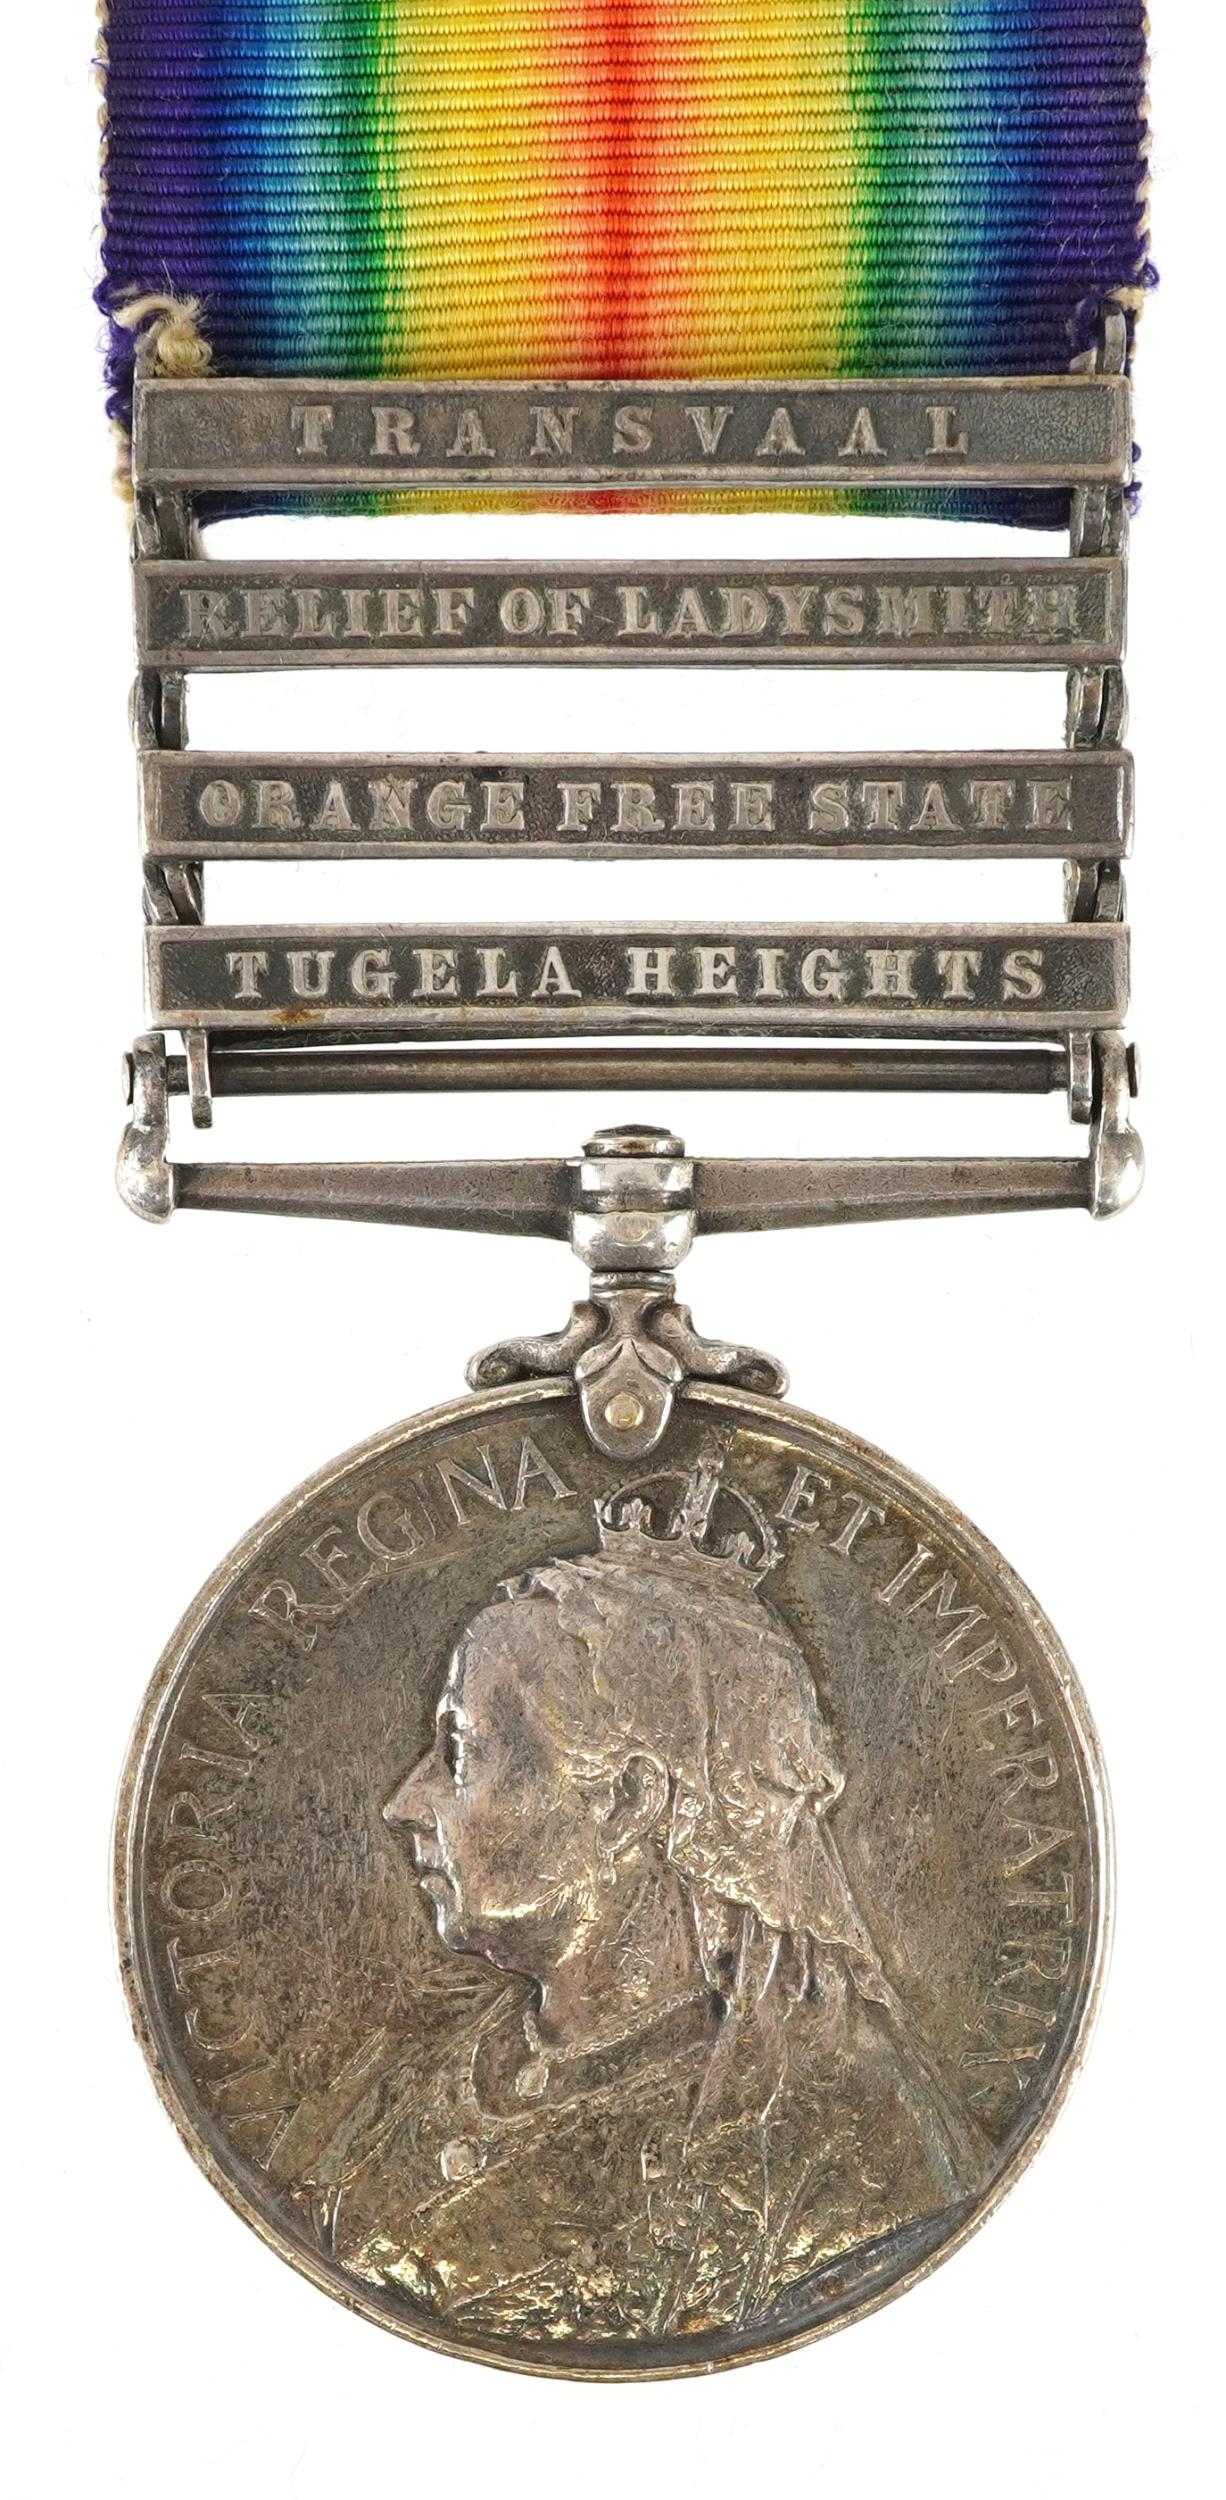 Victorian British military South Africa medal awarded to GNR.G.FITCH.R.F.A with Transvaal Relief